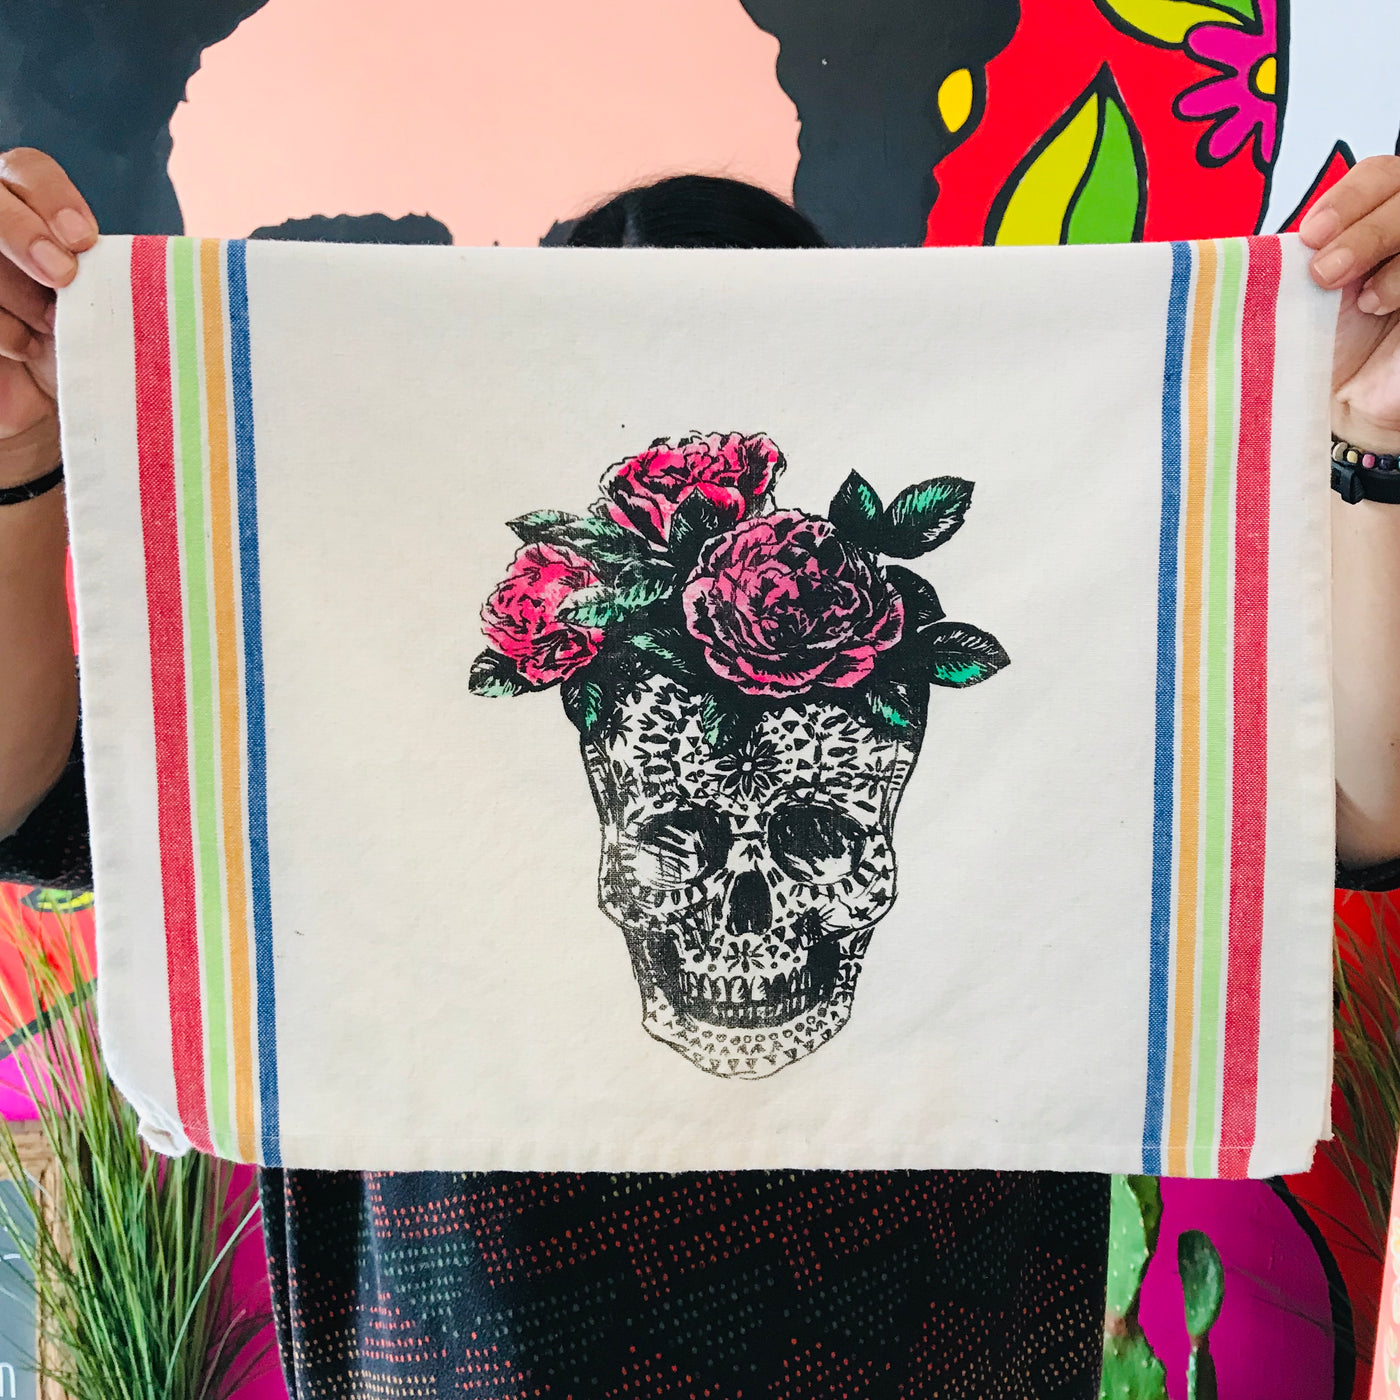 Loteria themed dish towels of a skull/la calavera and roses on its head